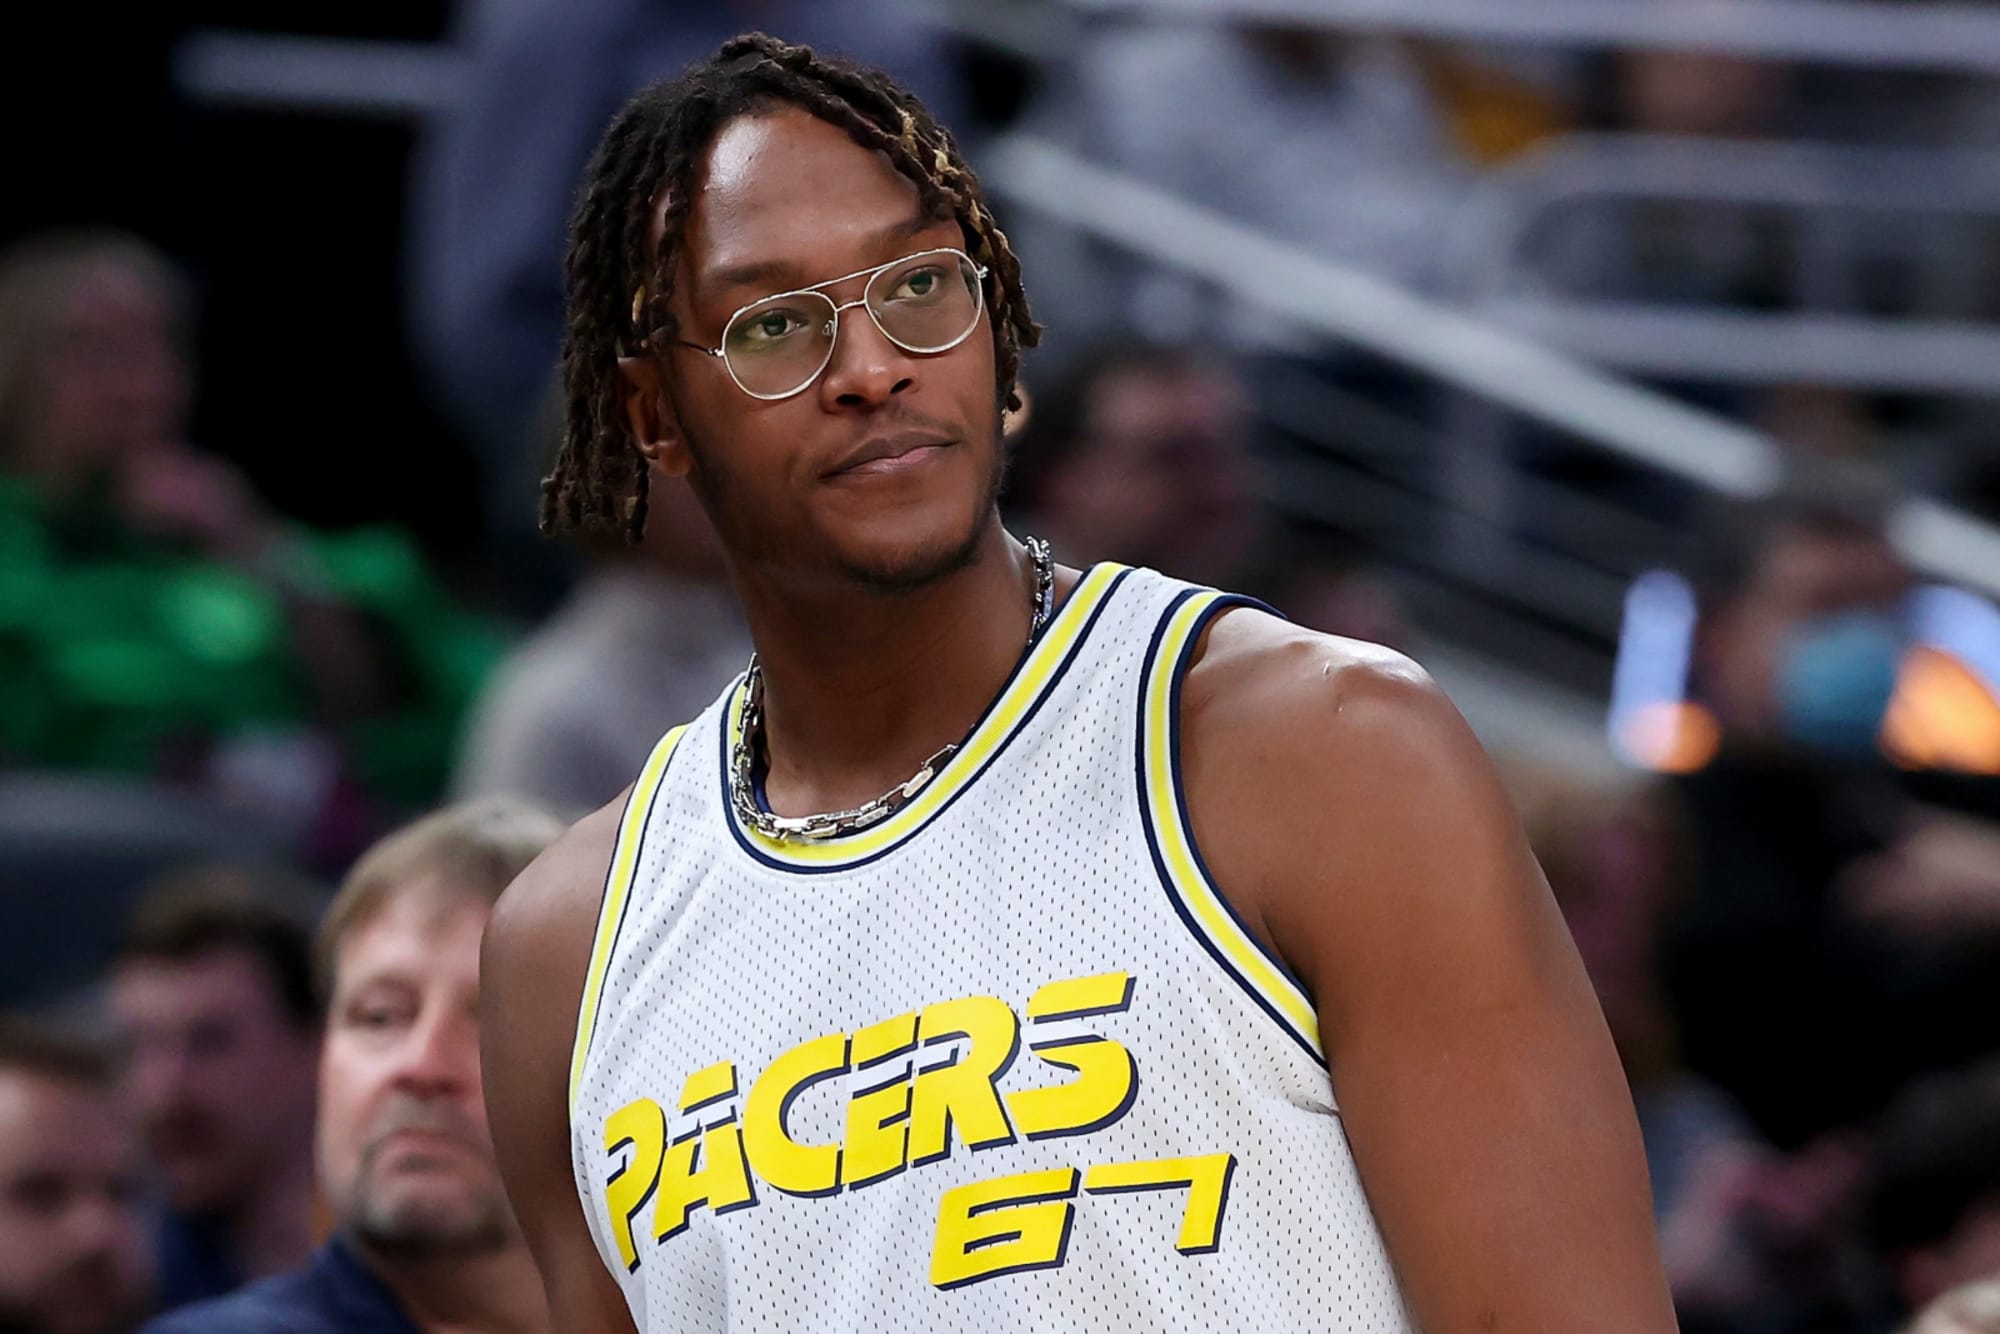 NBA insider reports huge development in Myles Turner's Pacers situation